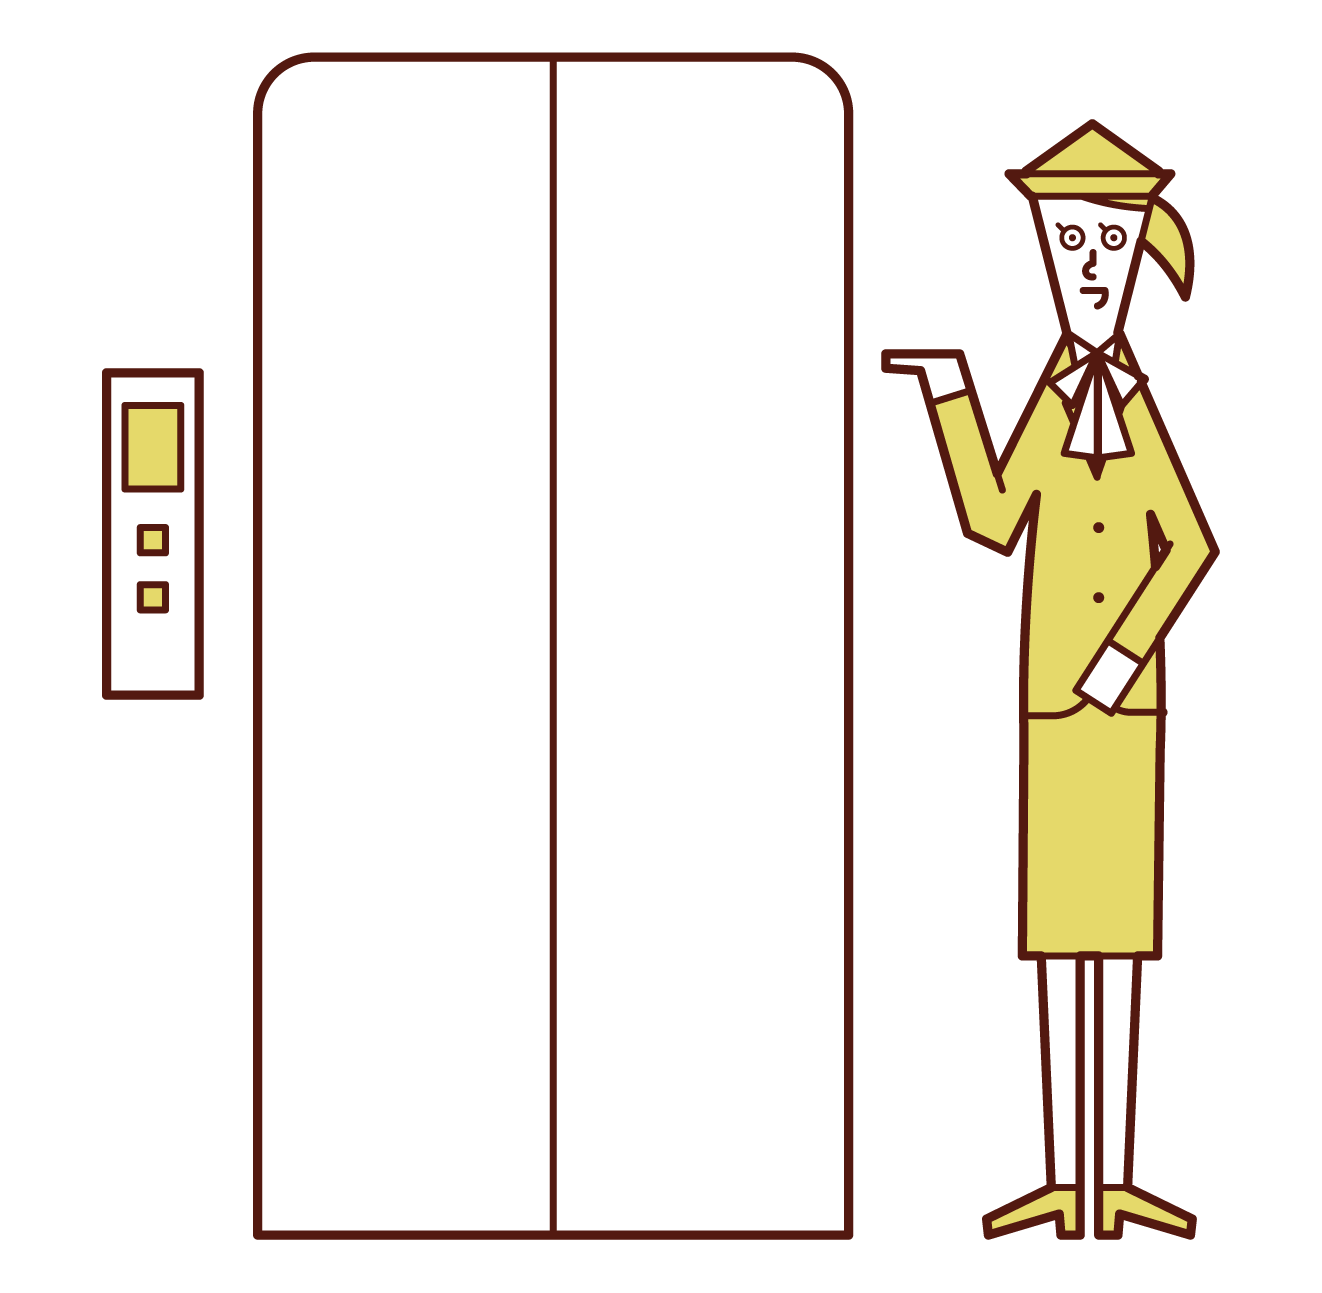 Illustration of elevator girl (woman) in a department store